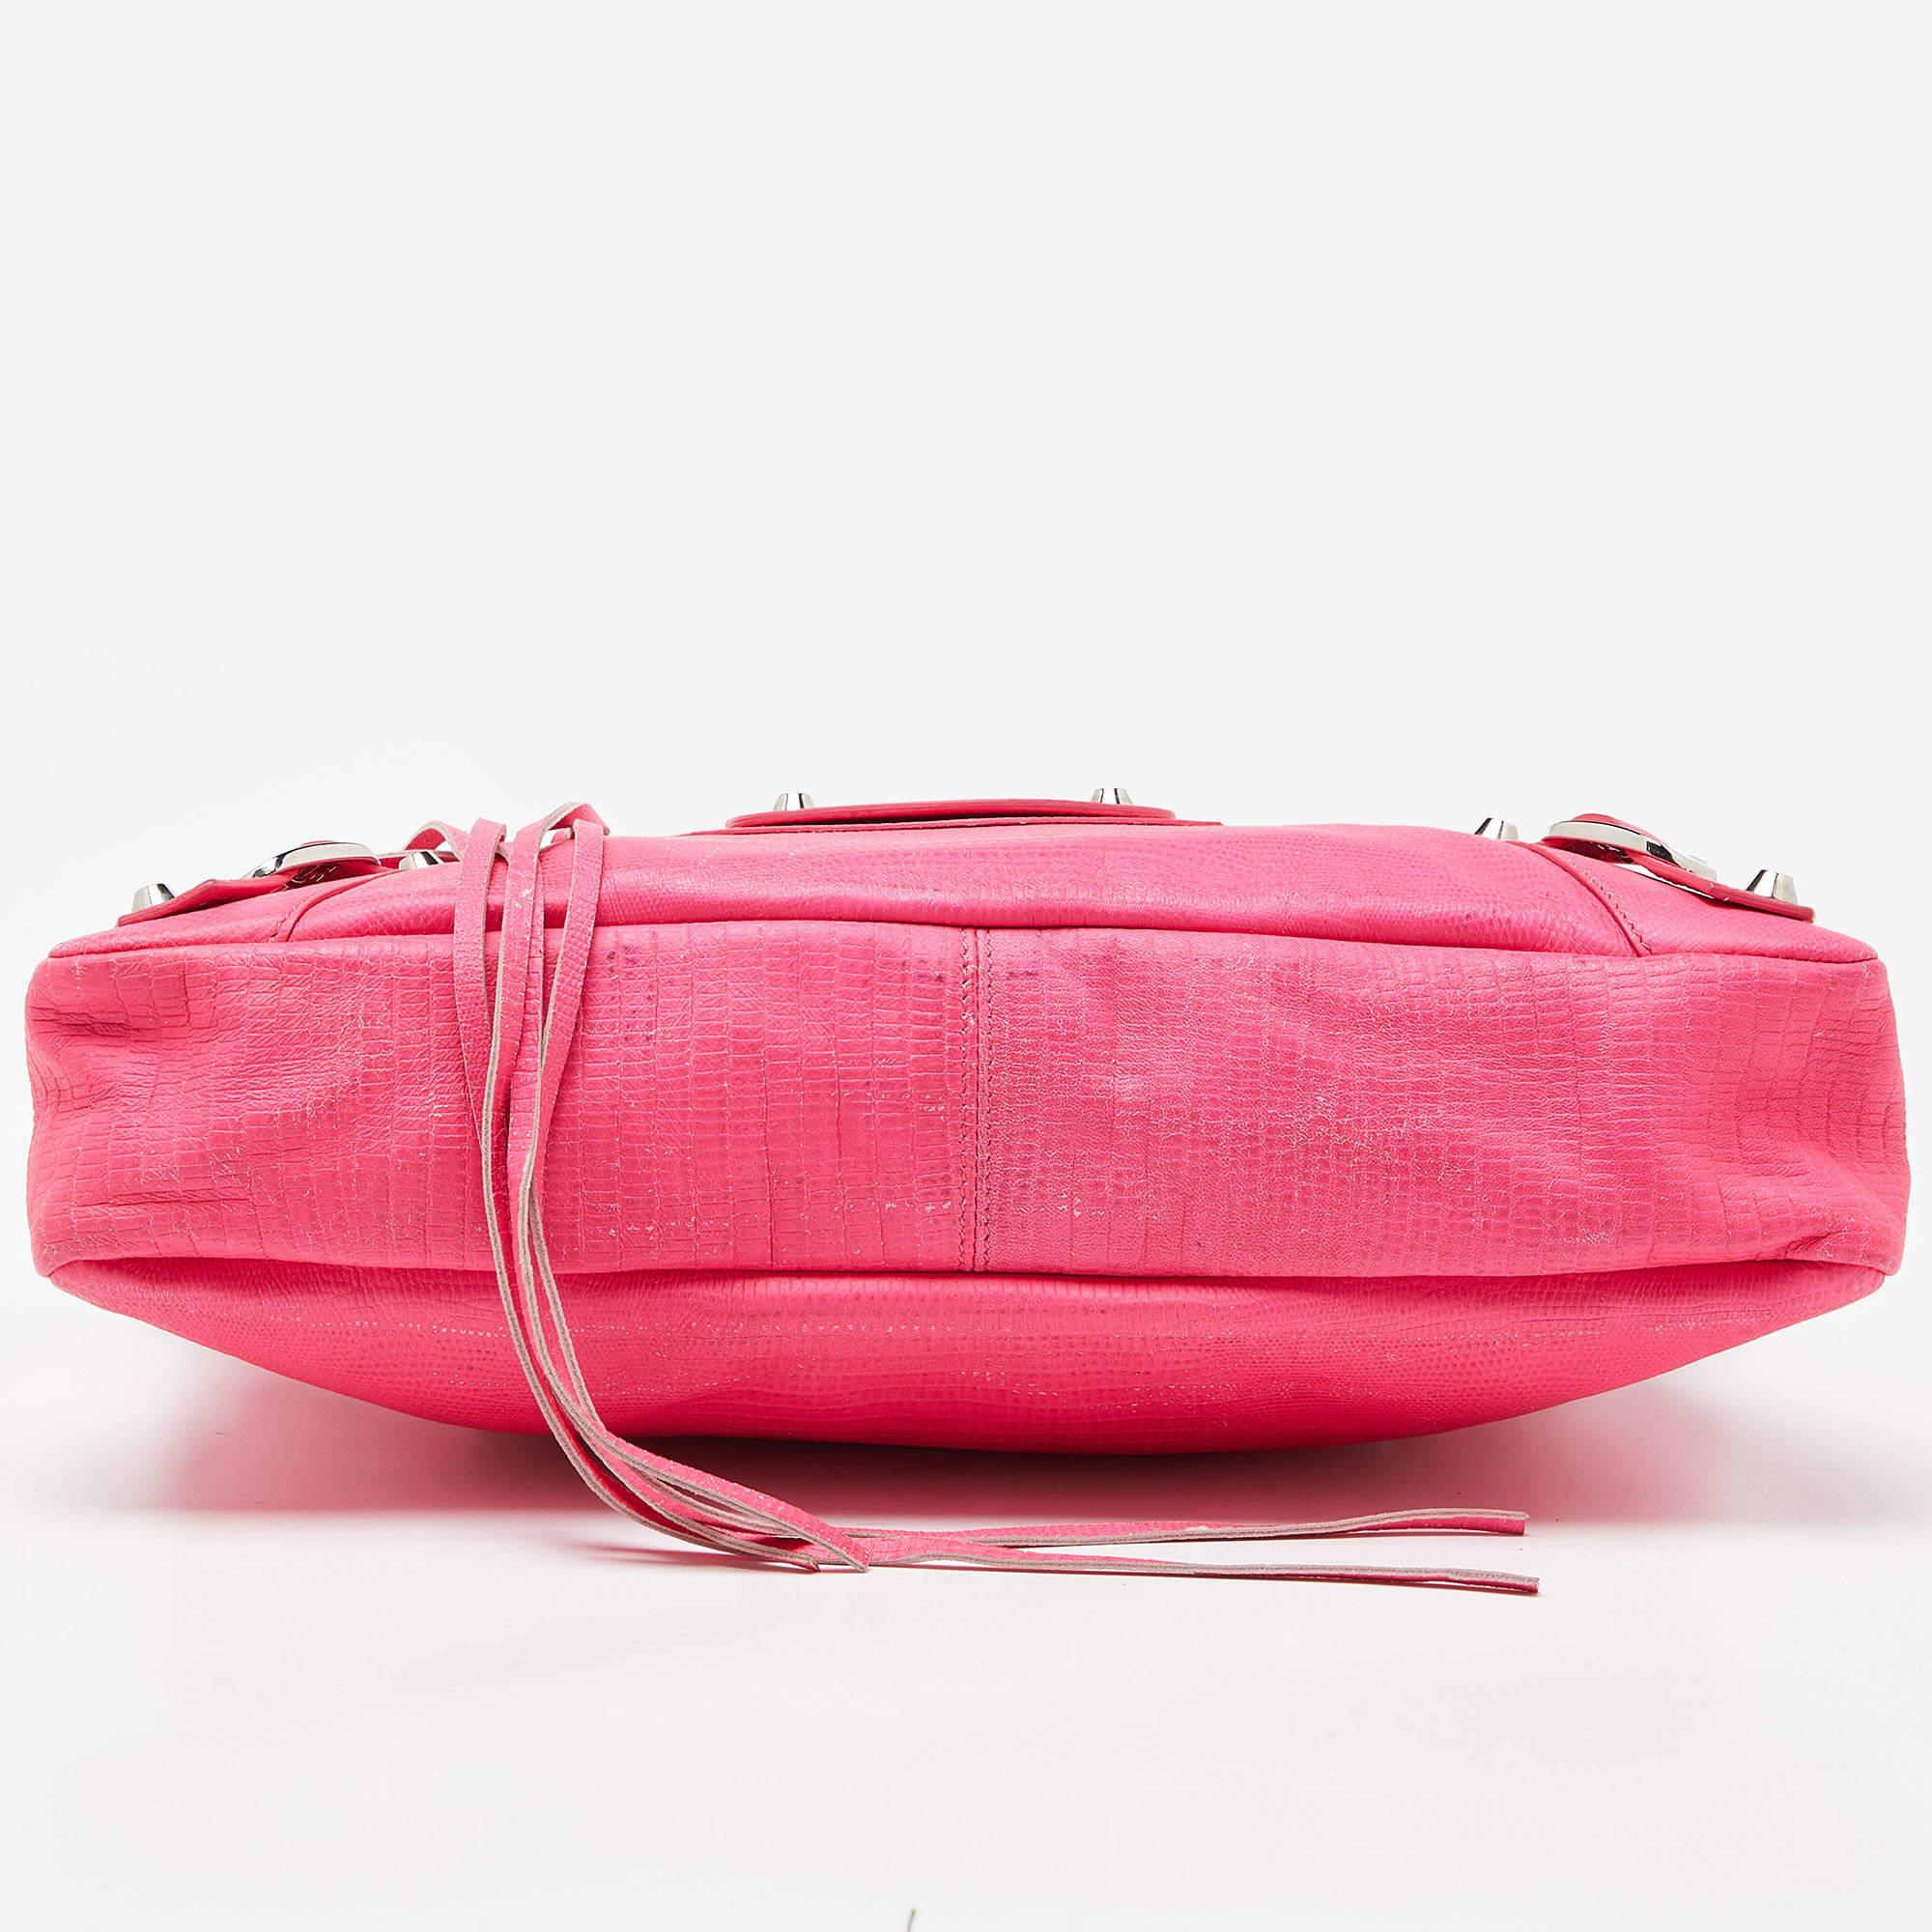 Balenciaga Neon Pink Leather Classic First Tote For Sale 5